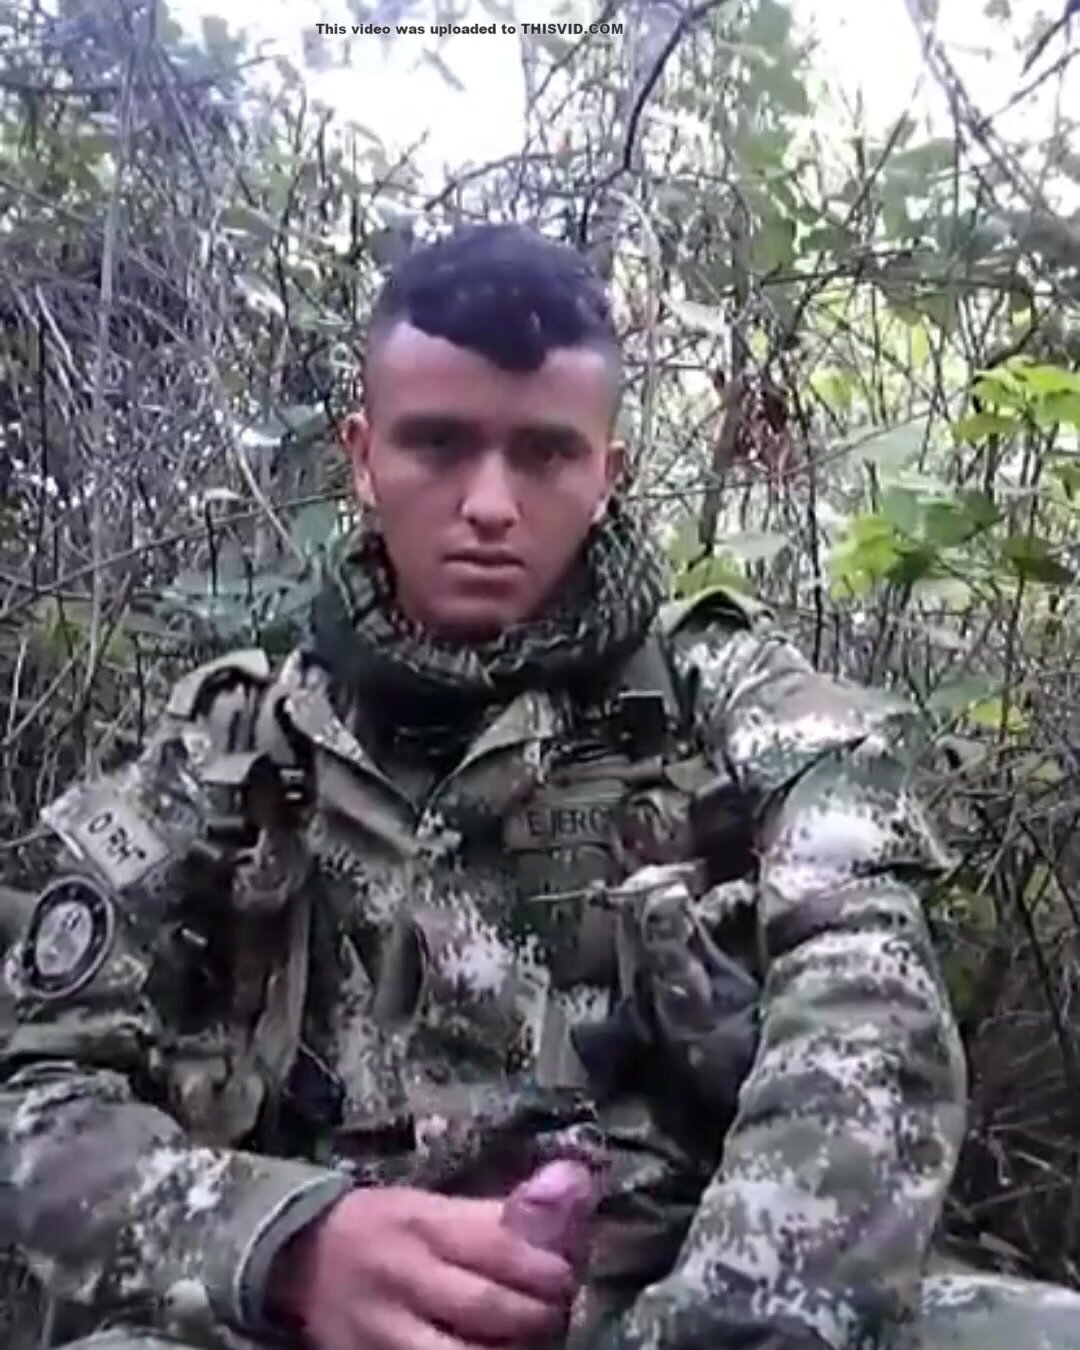 SOLDIER FROM COLOMBIA CUMS IN UNIFORM